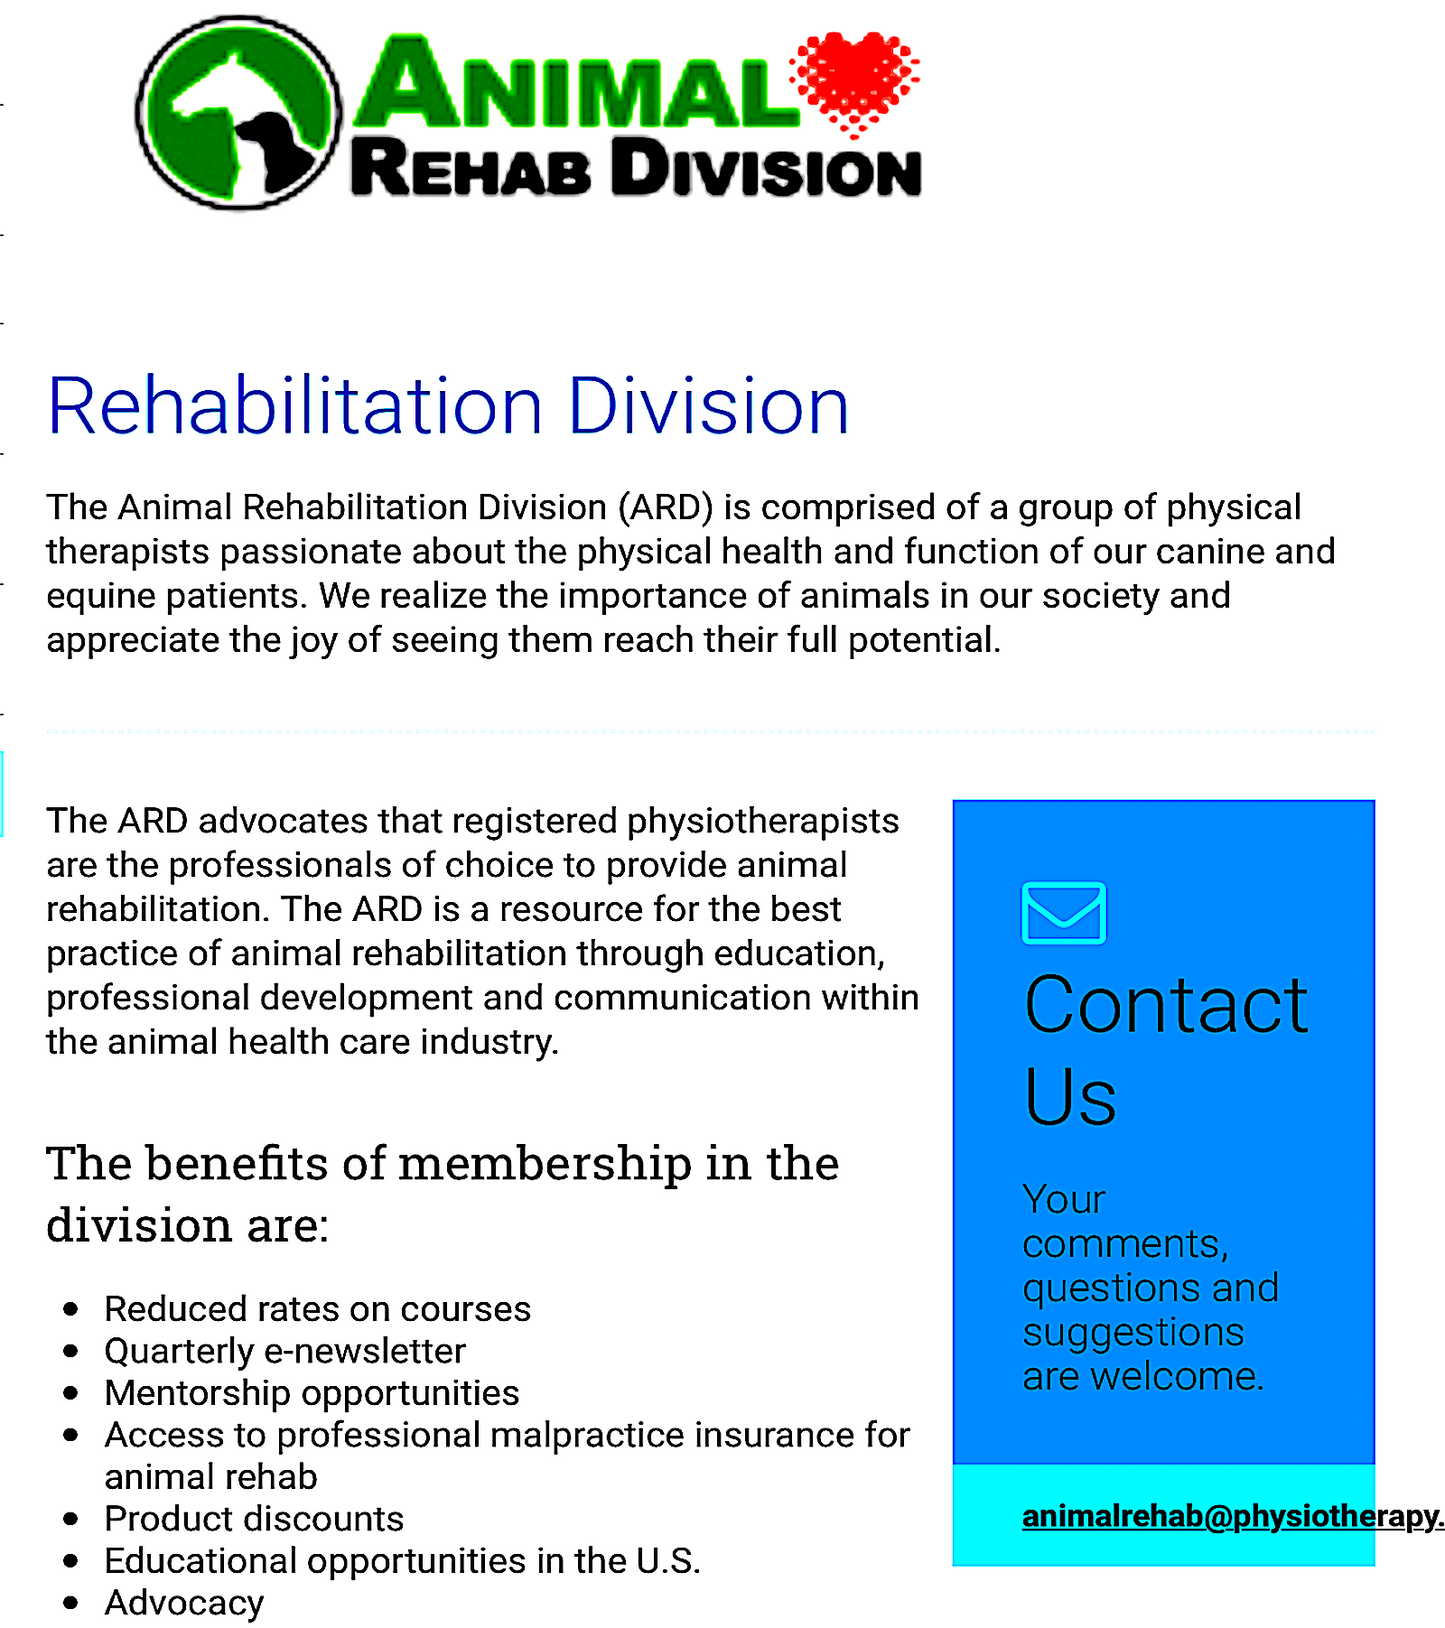 ANIMAL REHAB DIVISION-CANADIAN PHYSIOTHERAPY ASSOCIATION - Vital Vet